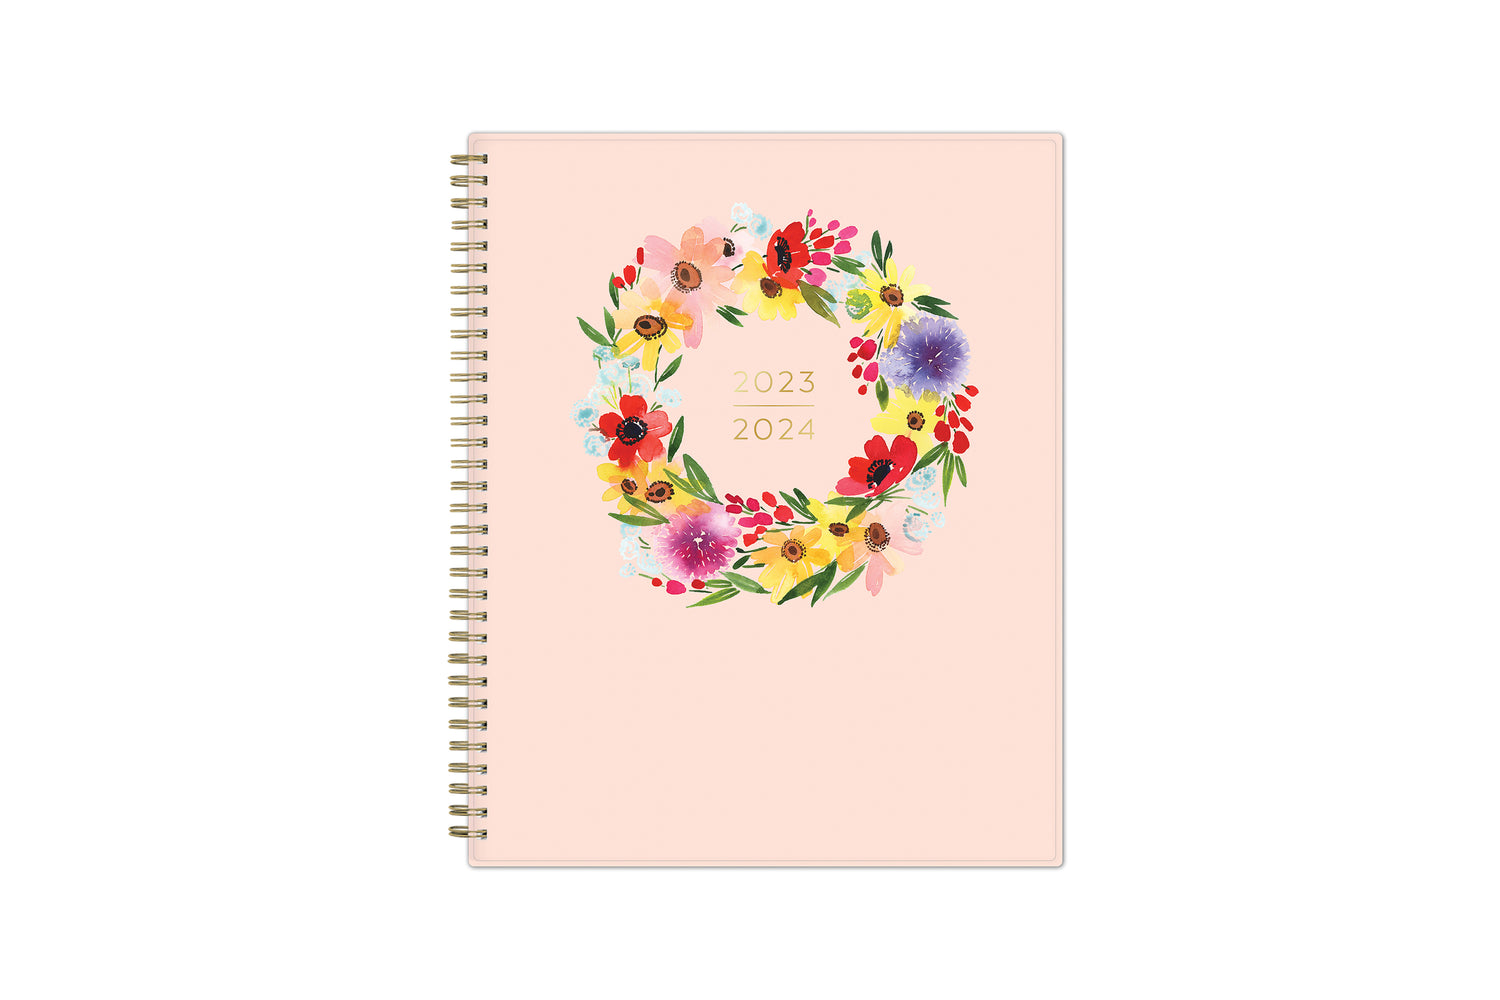 Bright colored floral wreath with 2023-2024 academic year planner on soft coral background  gold wire binding 8.5x11 size